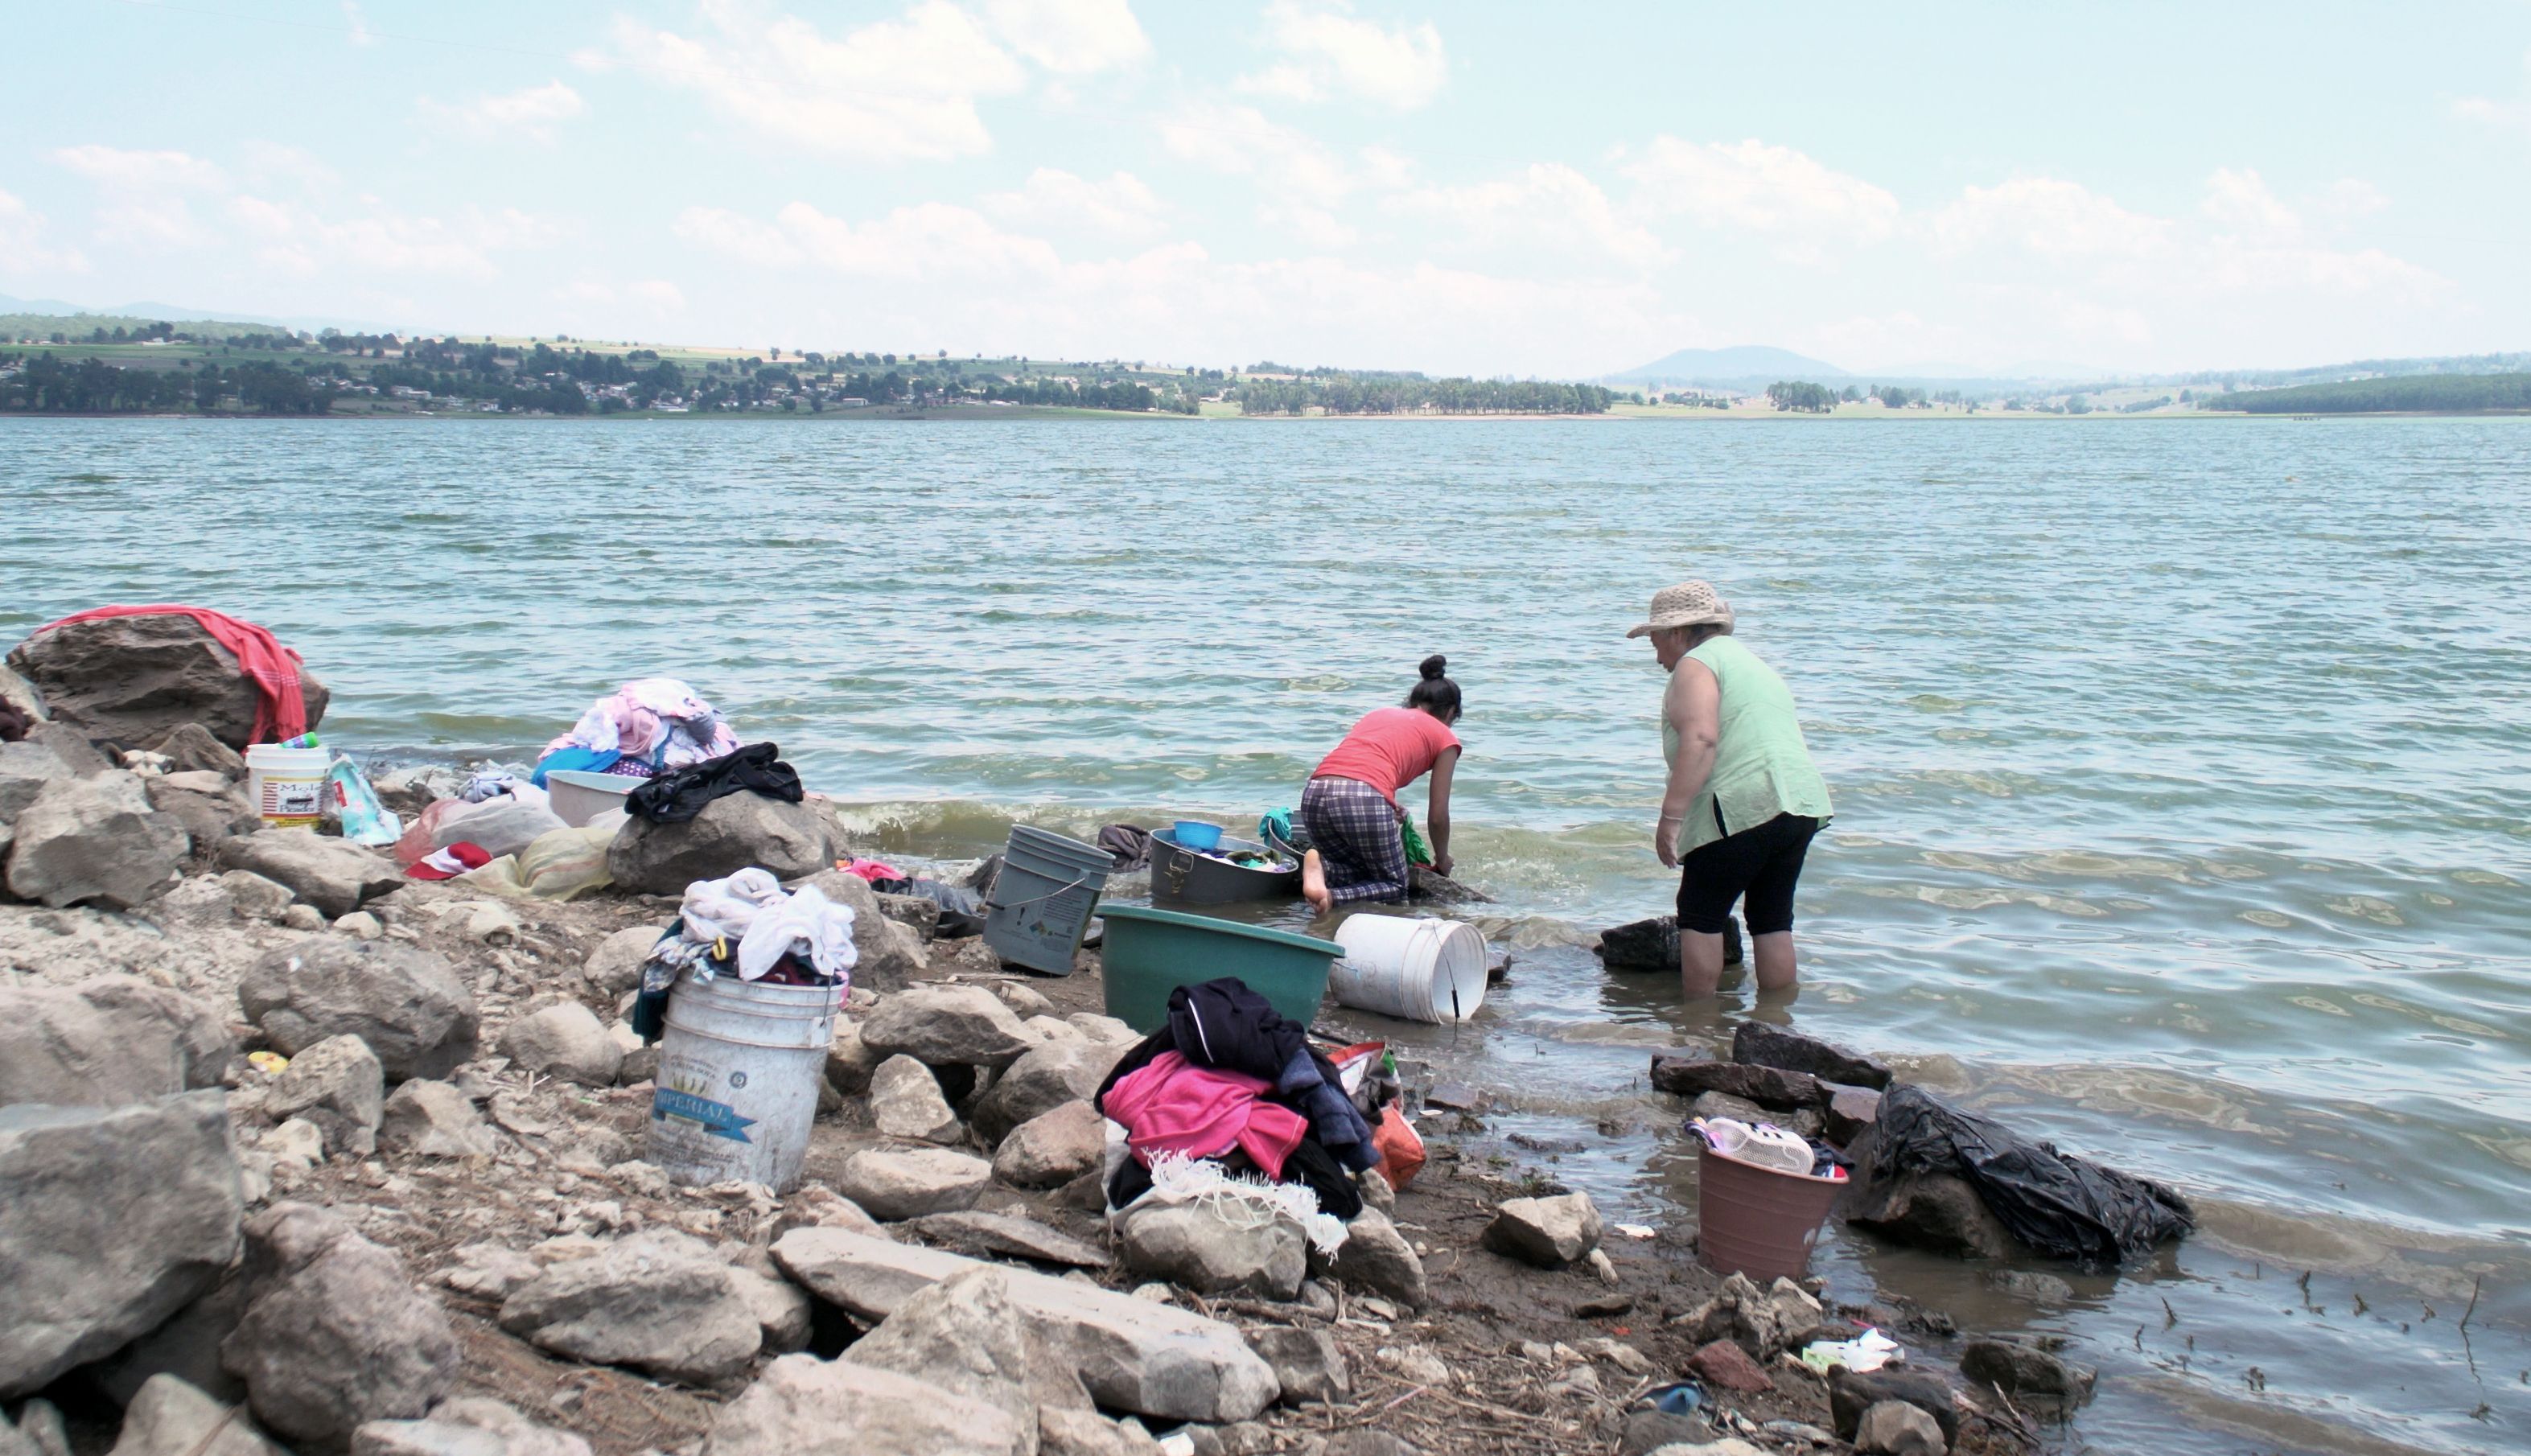 Women clean laundry in Villa Victoria, which is one of the ten dams within the Cutzamala System sub-basins. Image by Meg Vatterott. Mexico, 2018. 